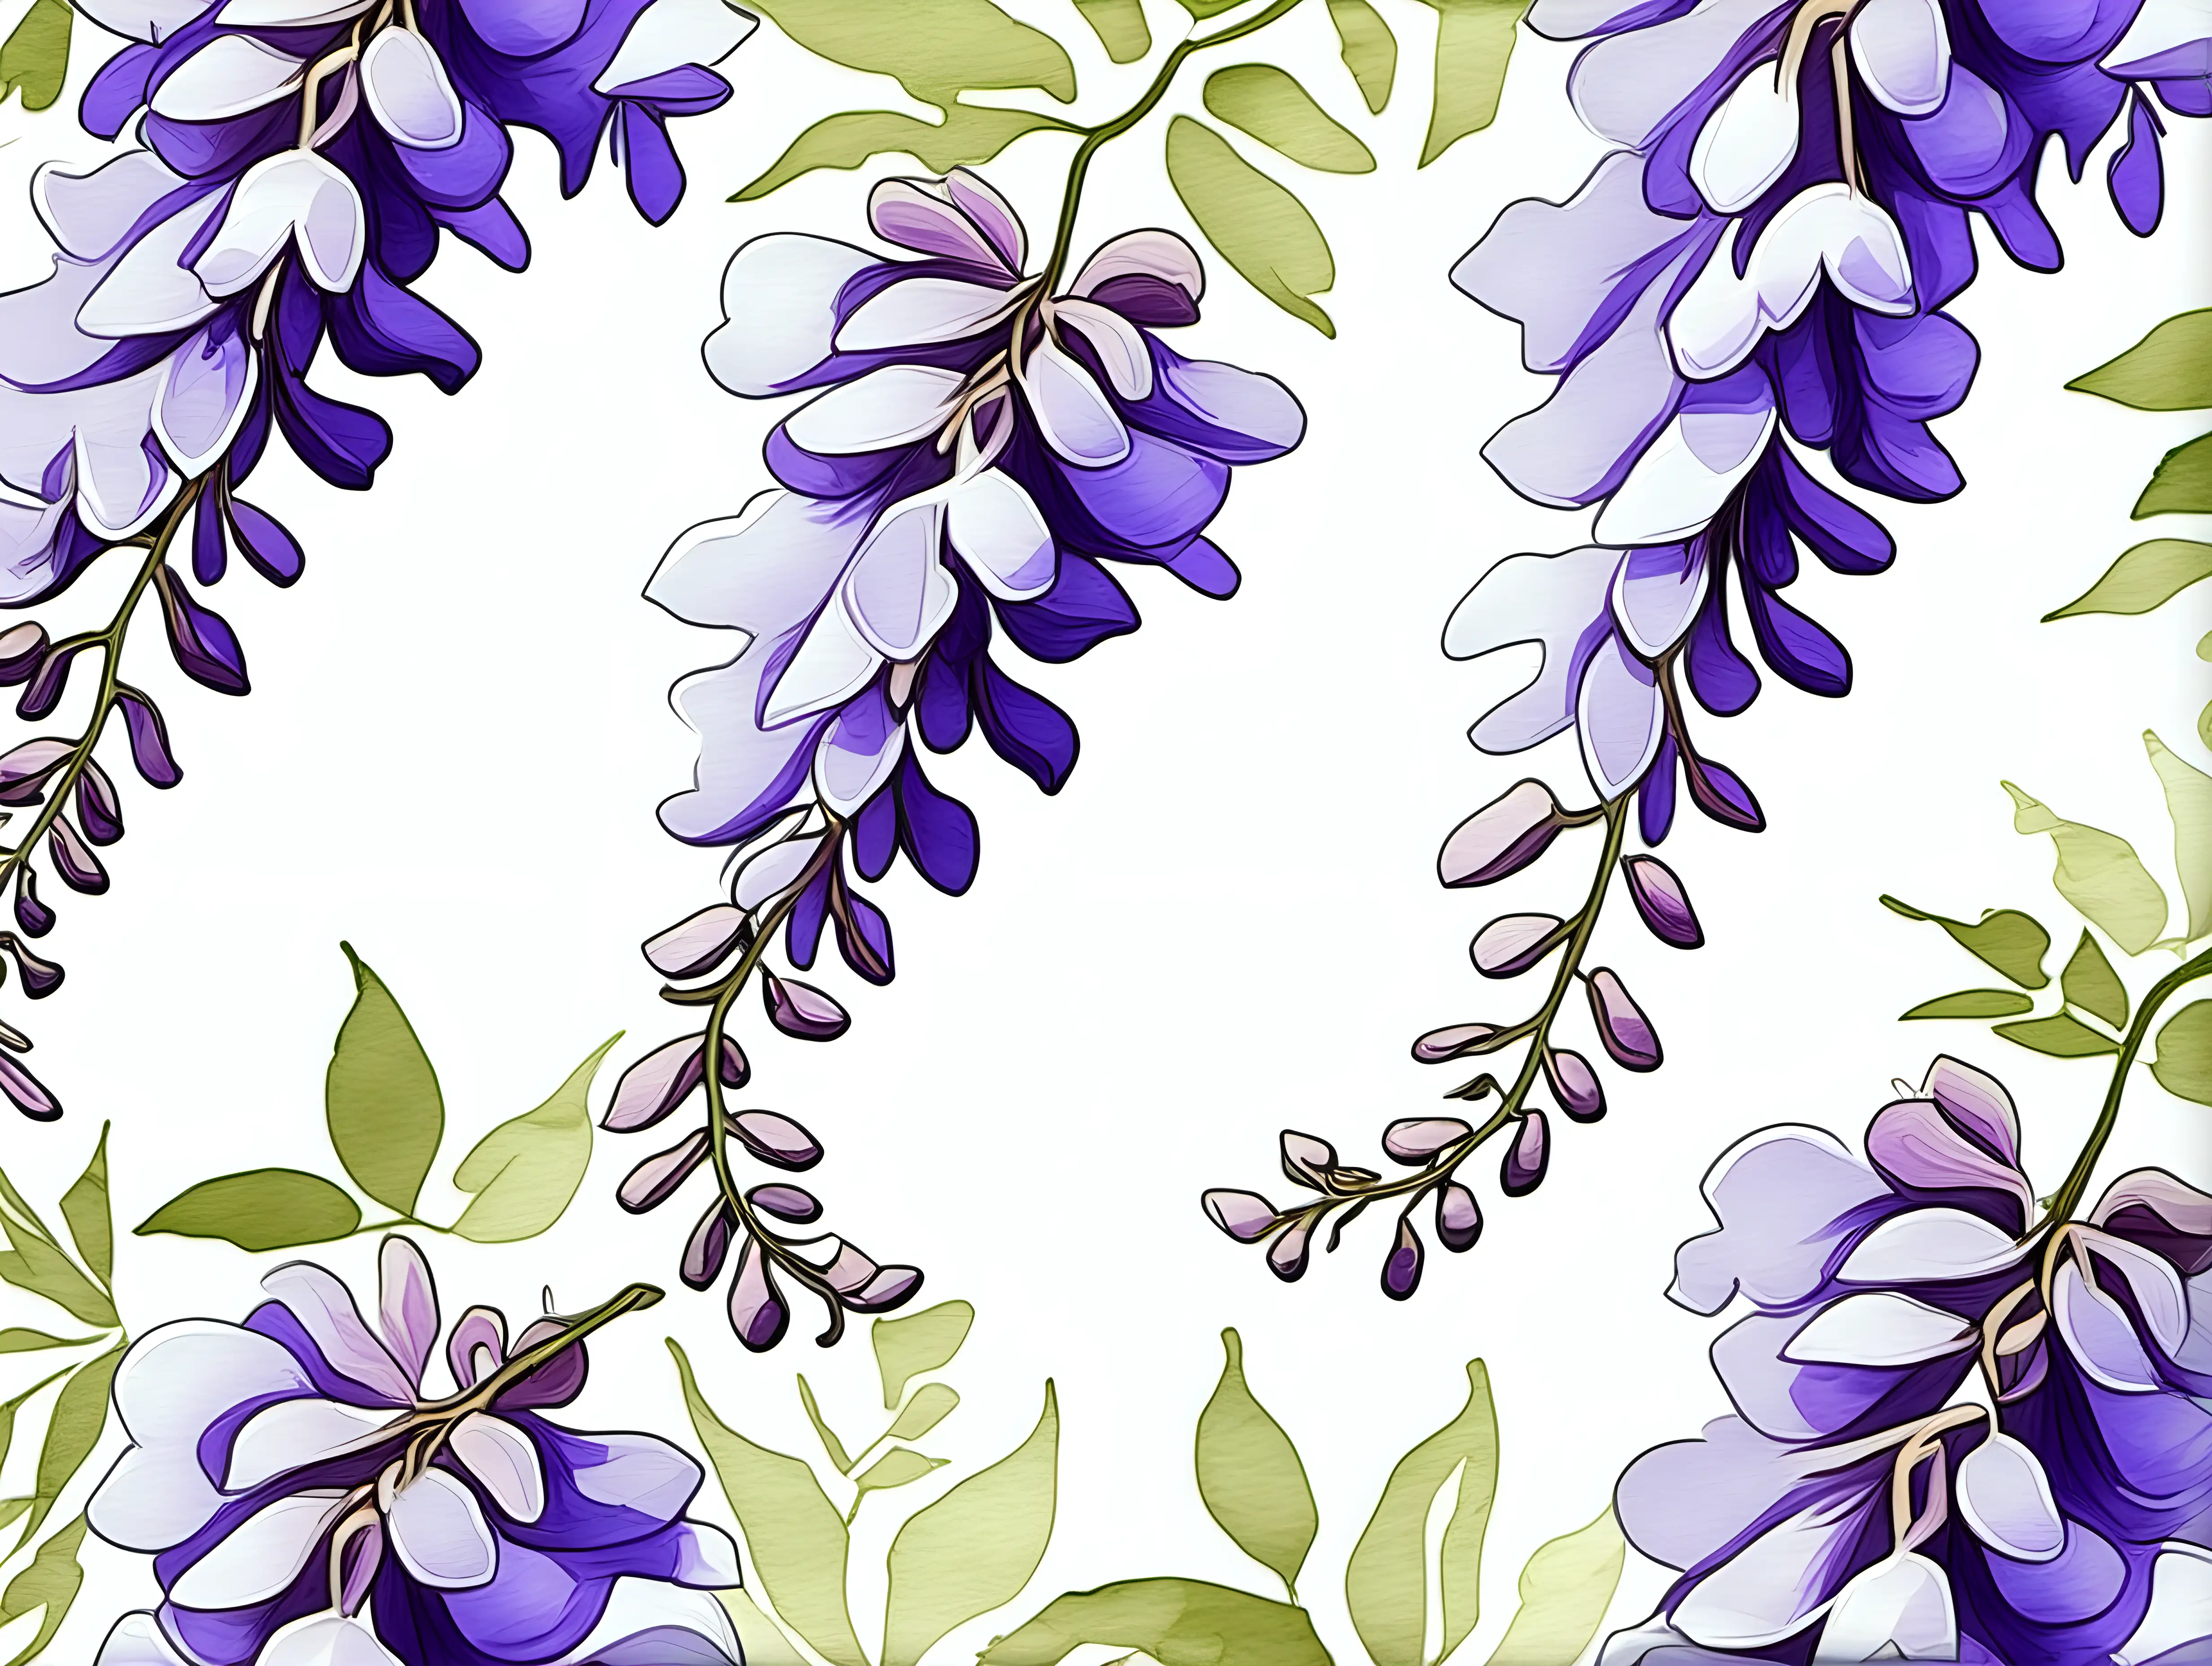 /imagine prompt pastel watercolor AMERICAN WISTERIA flowers clipart on a white background andy warhol inspired --tile